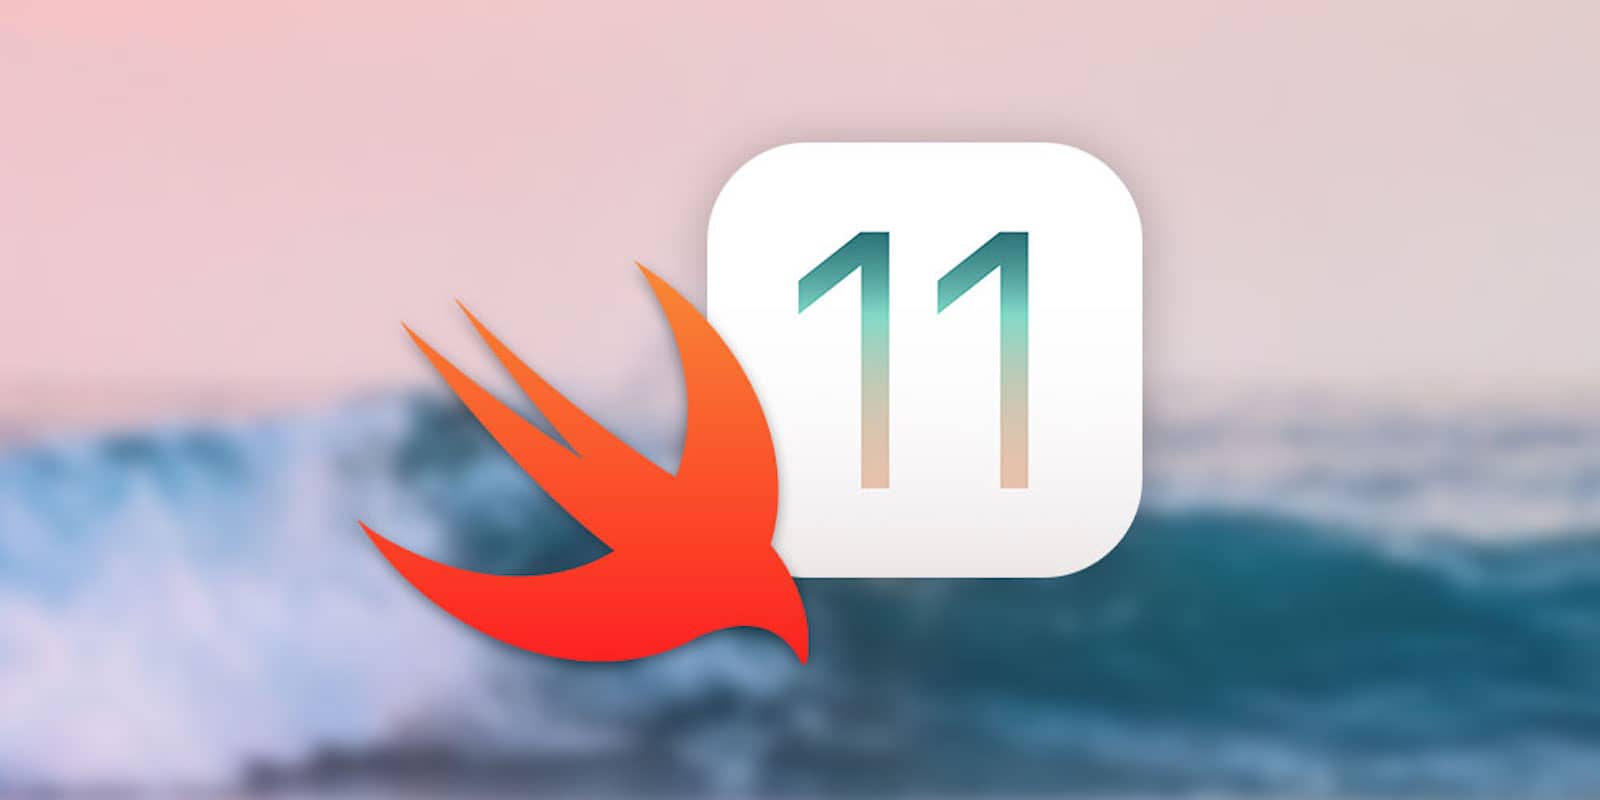 The Complete iOS 11 & Swift Developer Course- Build 20 Apps